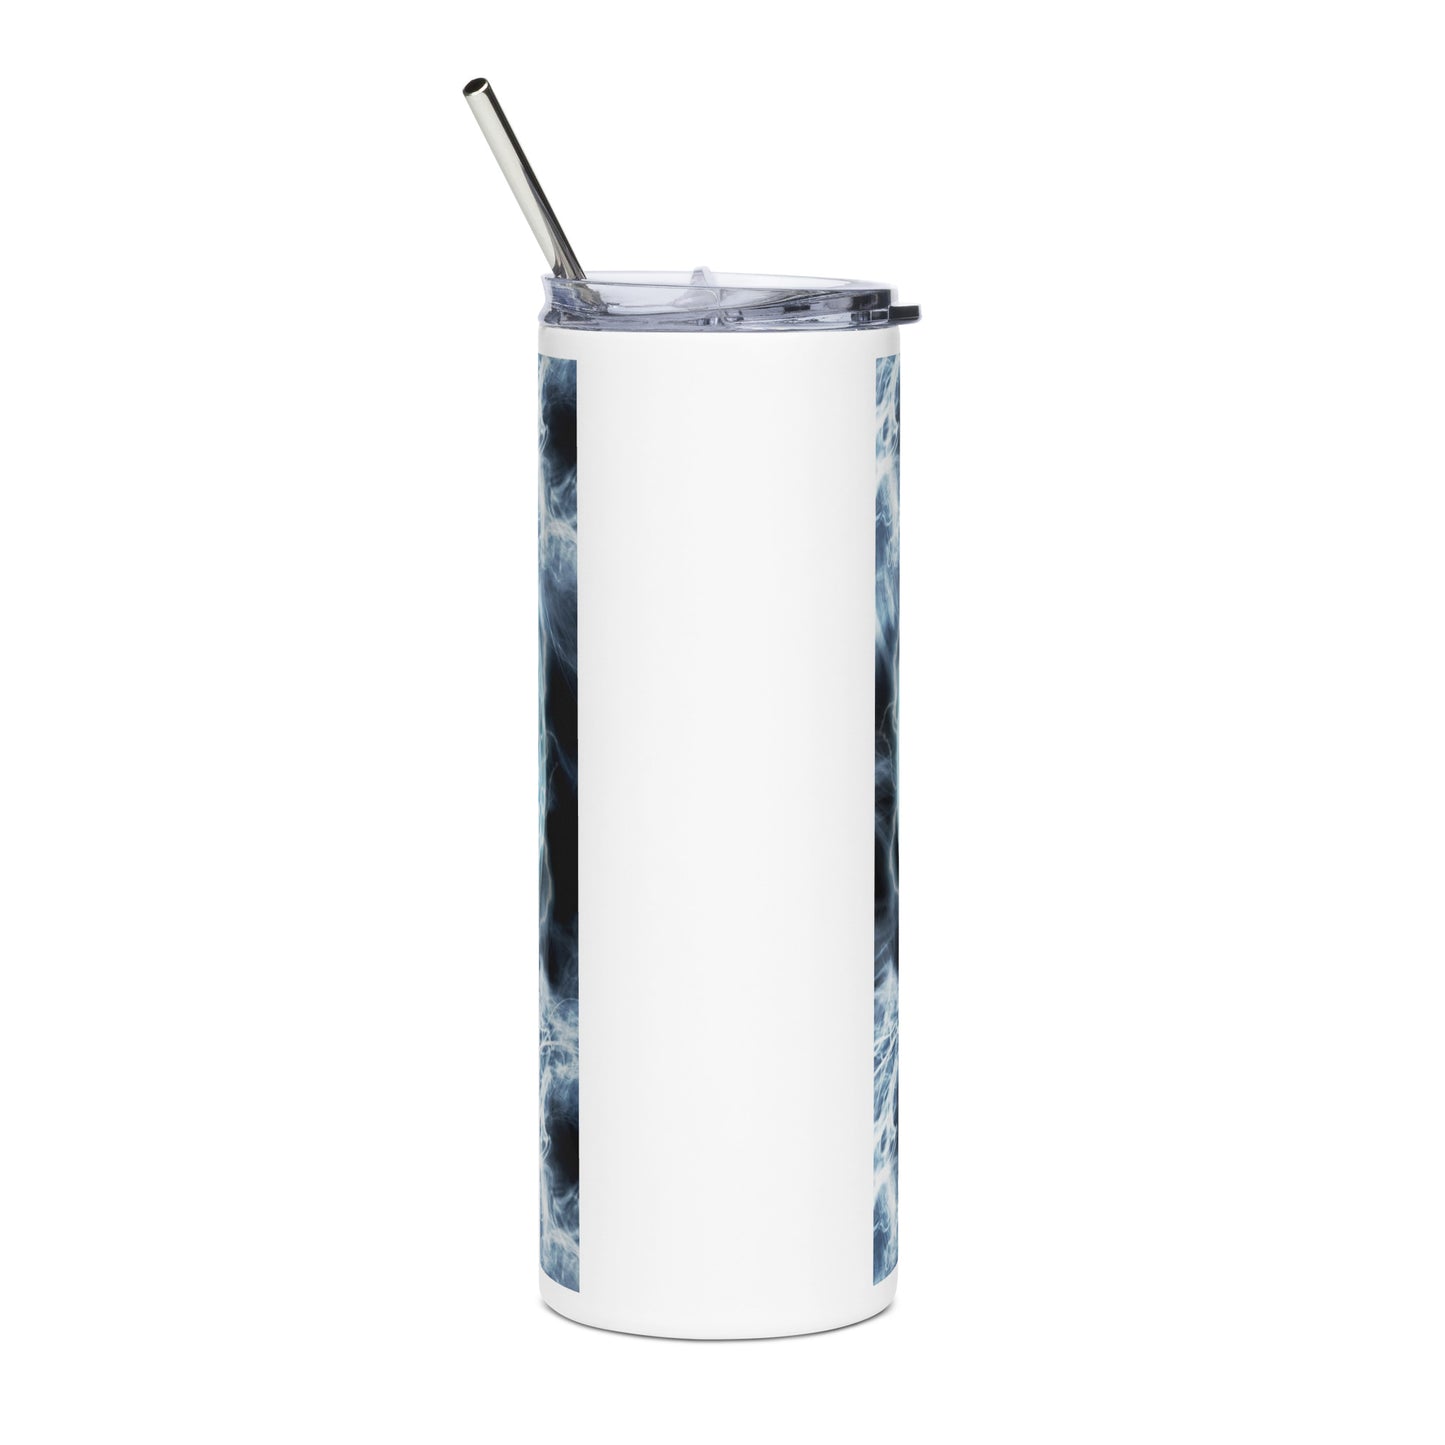 S’well x New Chapter Stainless Steel Straws